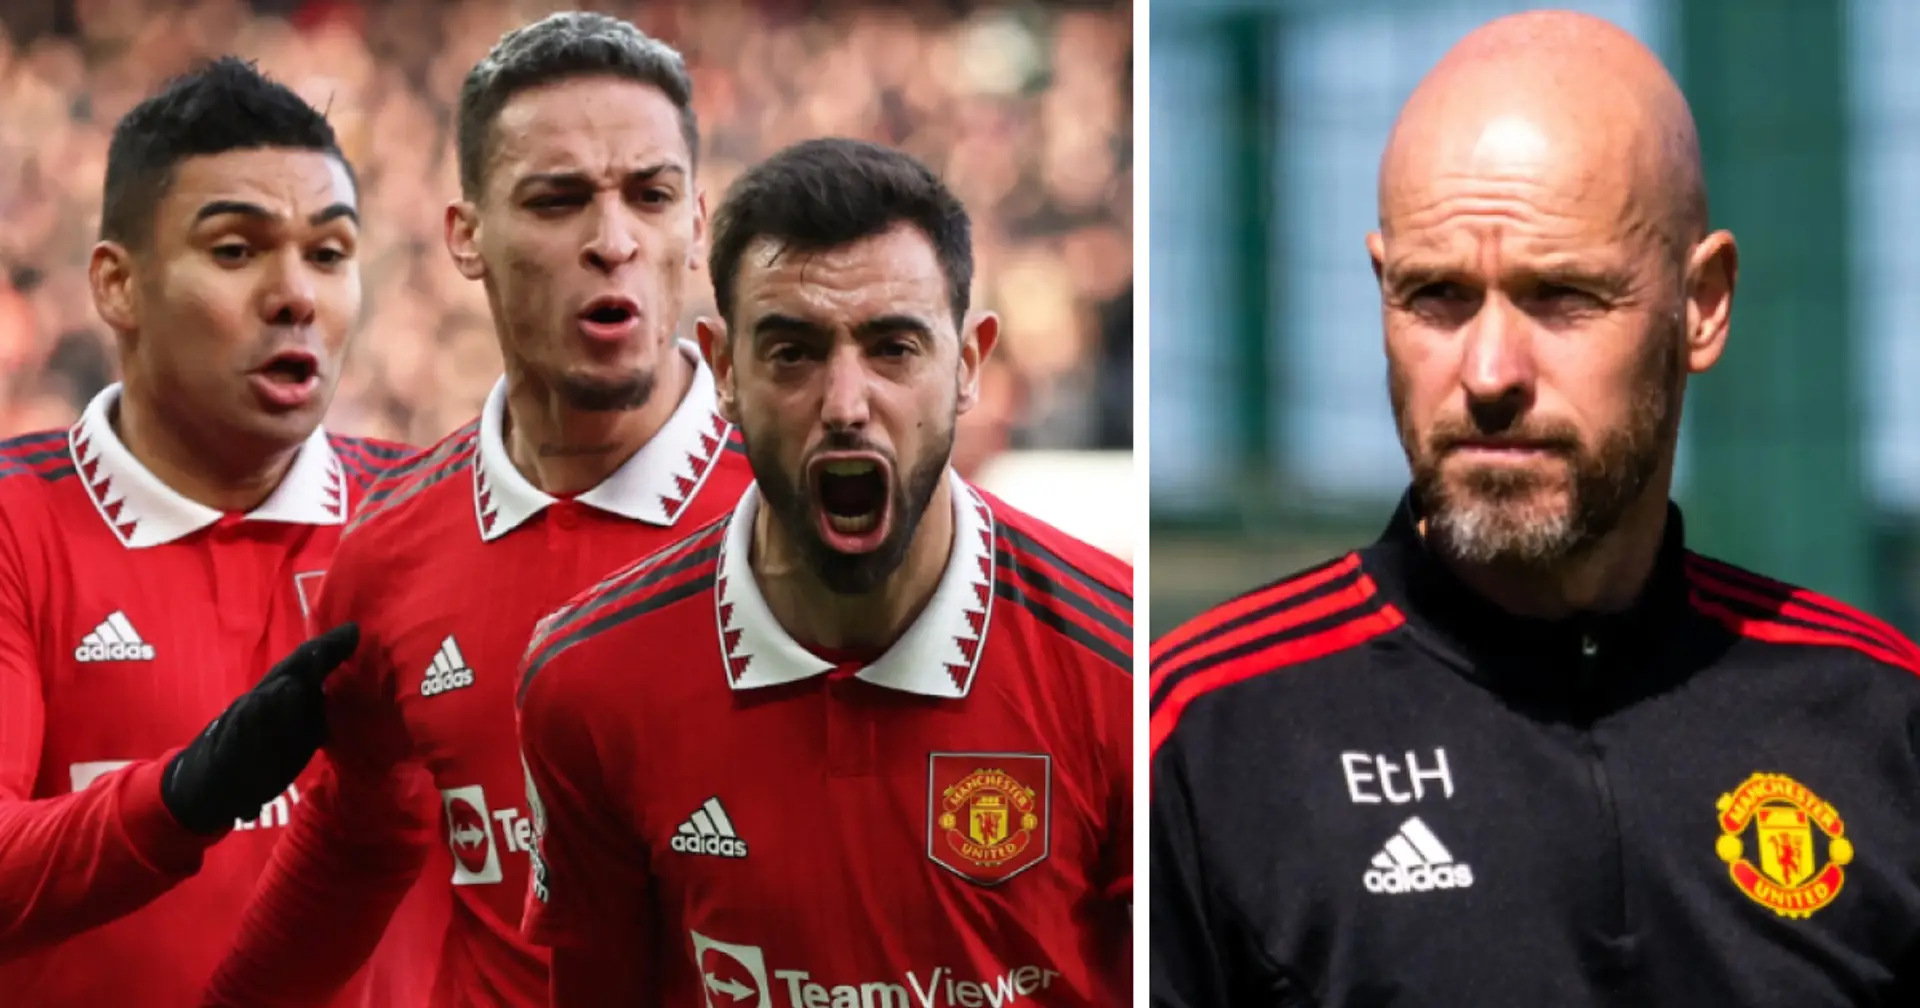 'Anyone that hates this guy is just biased, jealous, insecure': Man United fans claim one player needs more respect on his name